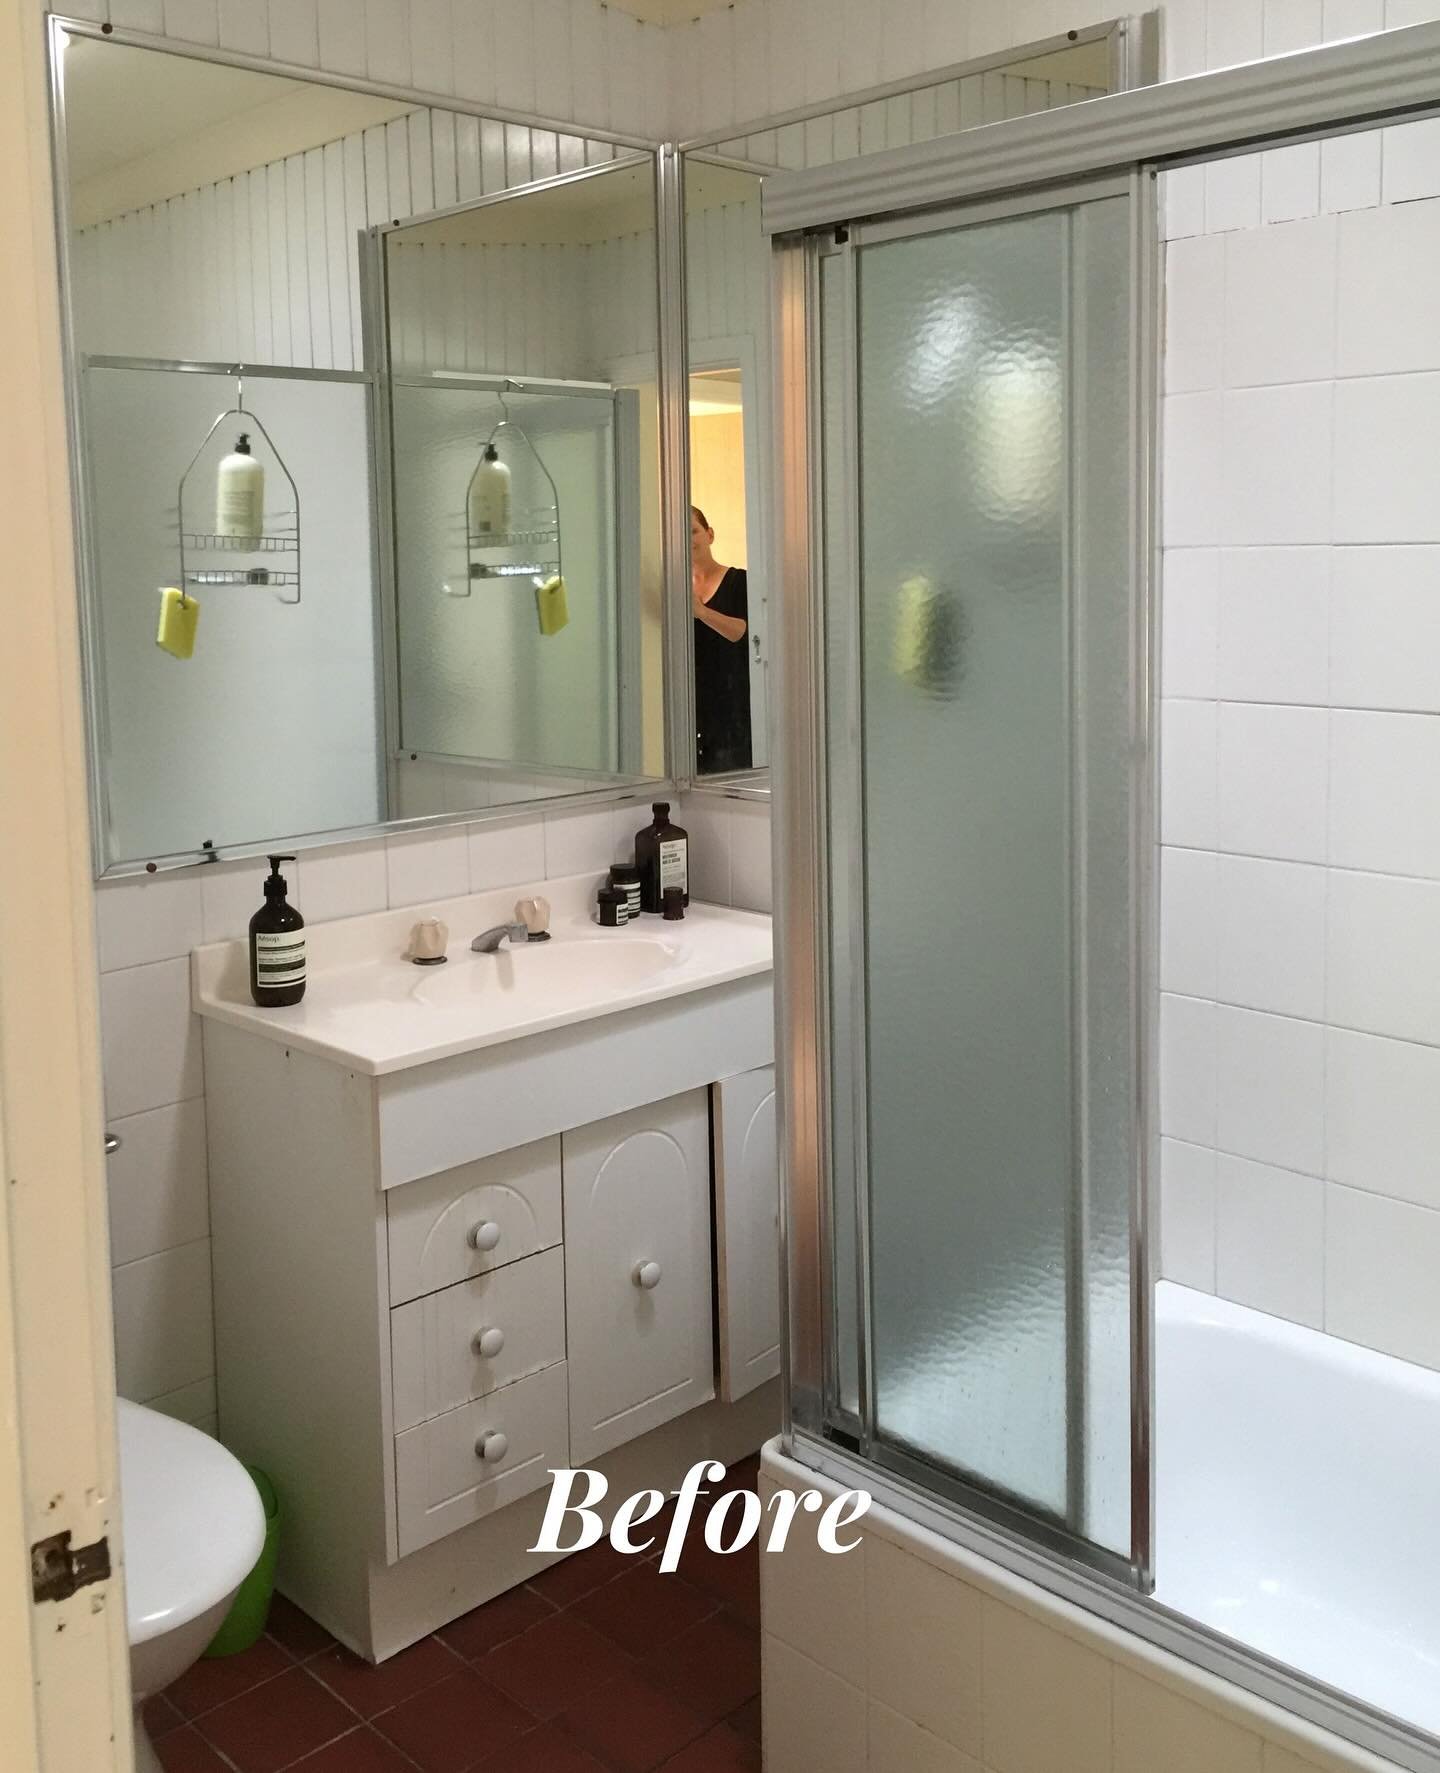 I gave my bathroom a quick DIY cosmetic makeover six years ago, removing the shower screen, replacing the old vanity with a handcrafted one and adding some timber features.⁠ Swipe for a sneak peak of how my recent reno turned out!⁠
👉🏼 Click through